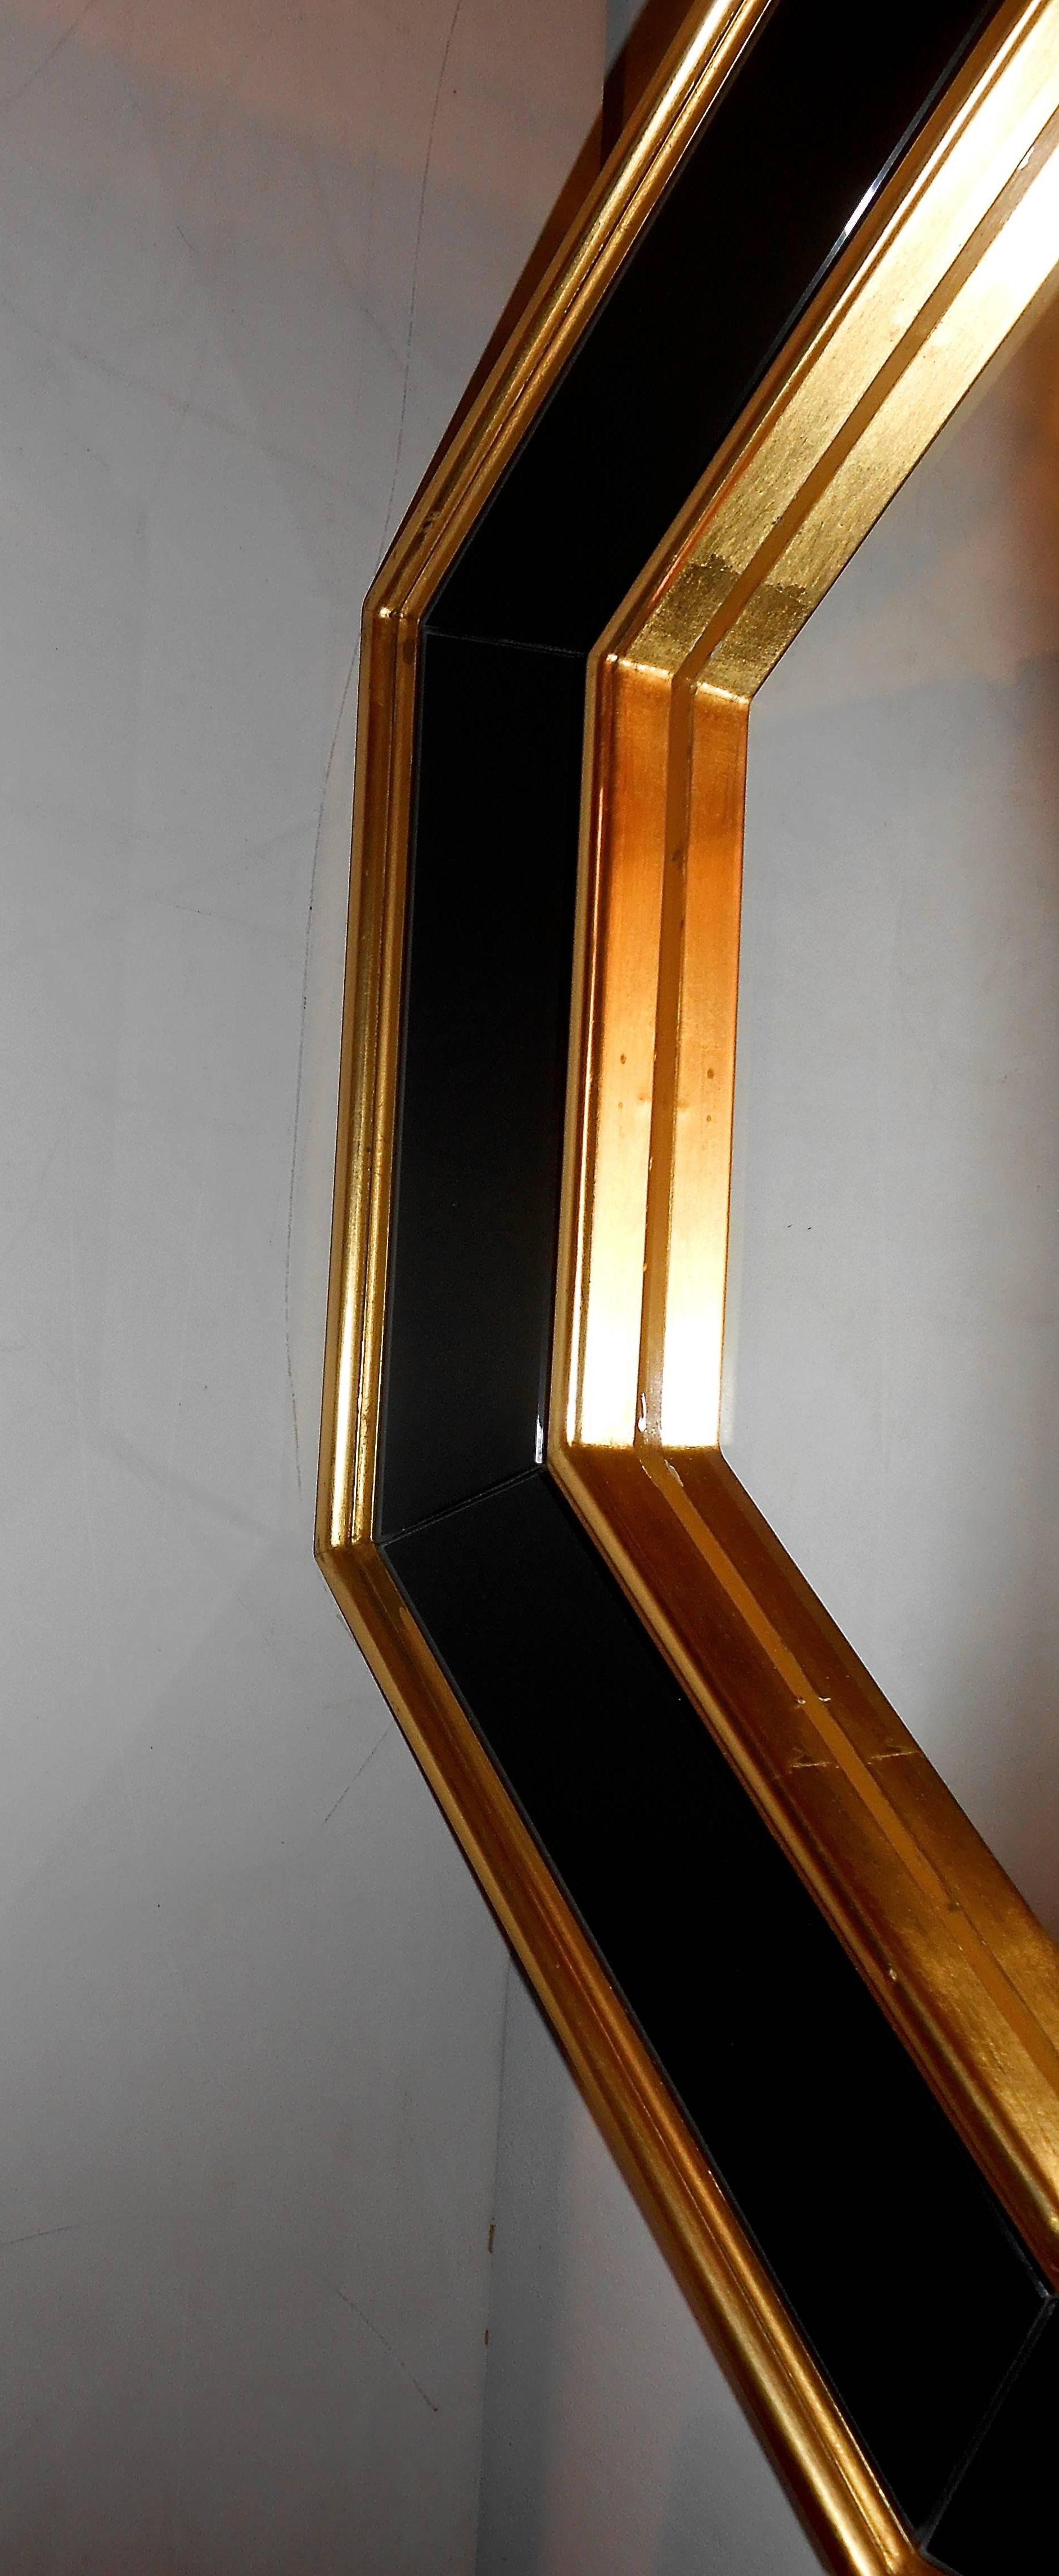 Giltwood and black opaline parts.
French from the 1970s.
In the style of Maison Jansen.